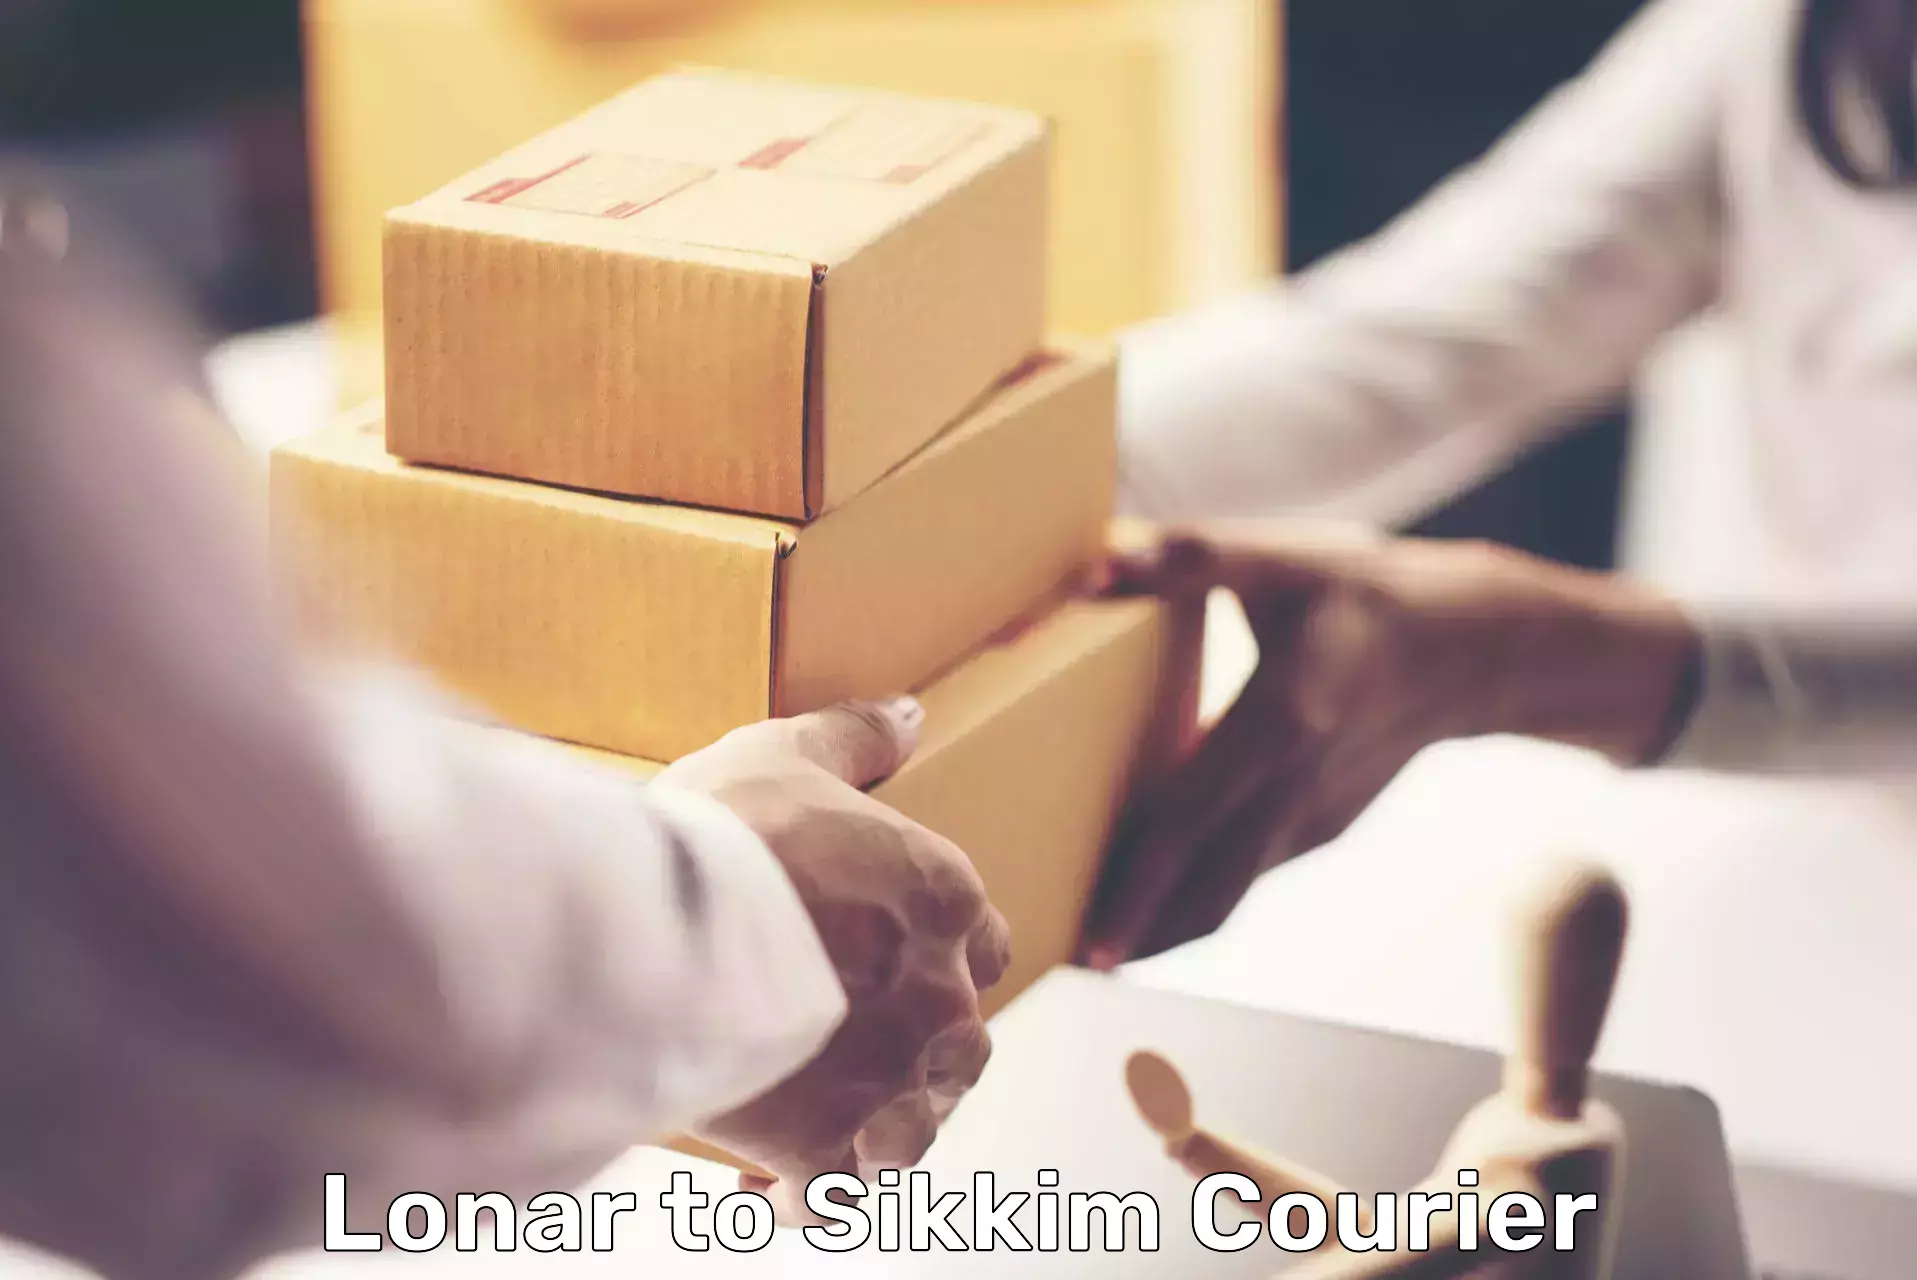 Smart shipping technology Lonar to Pelling